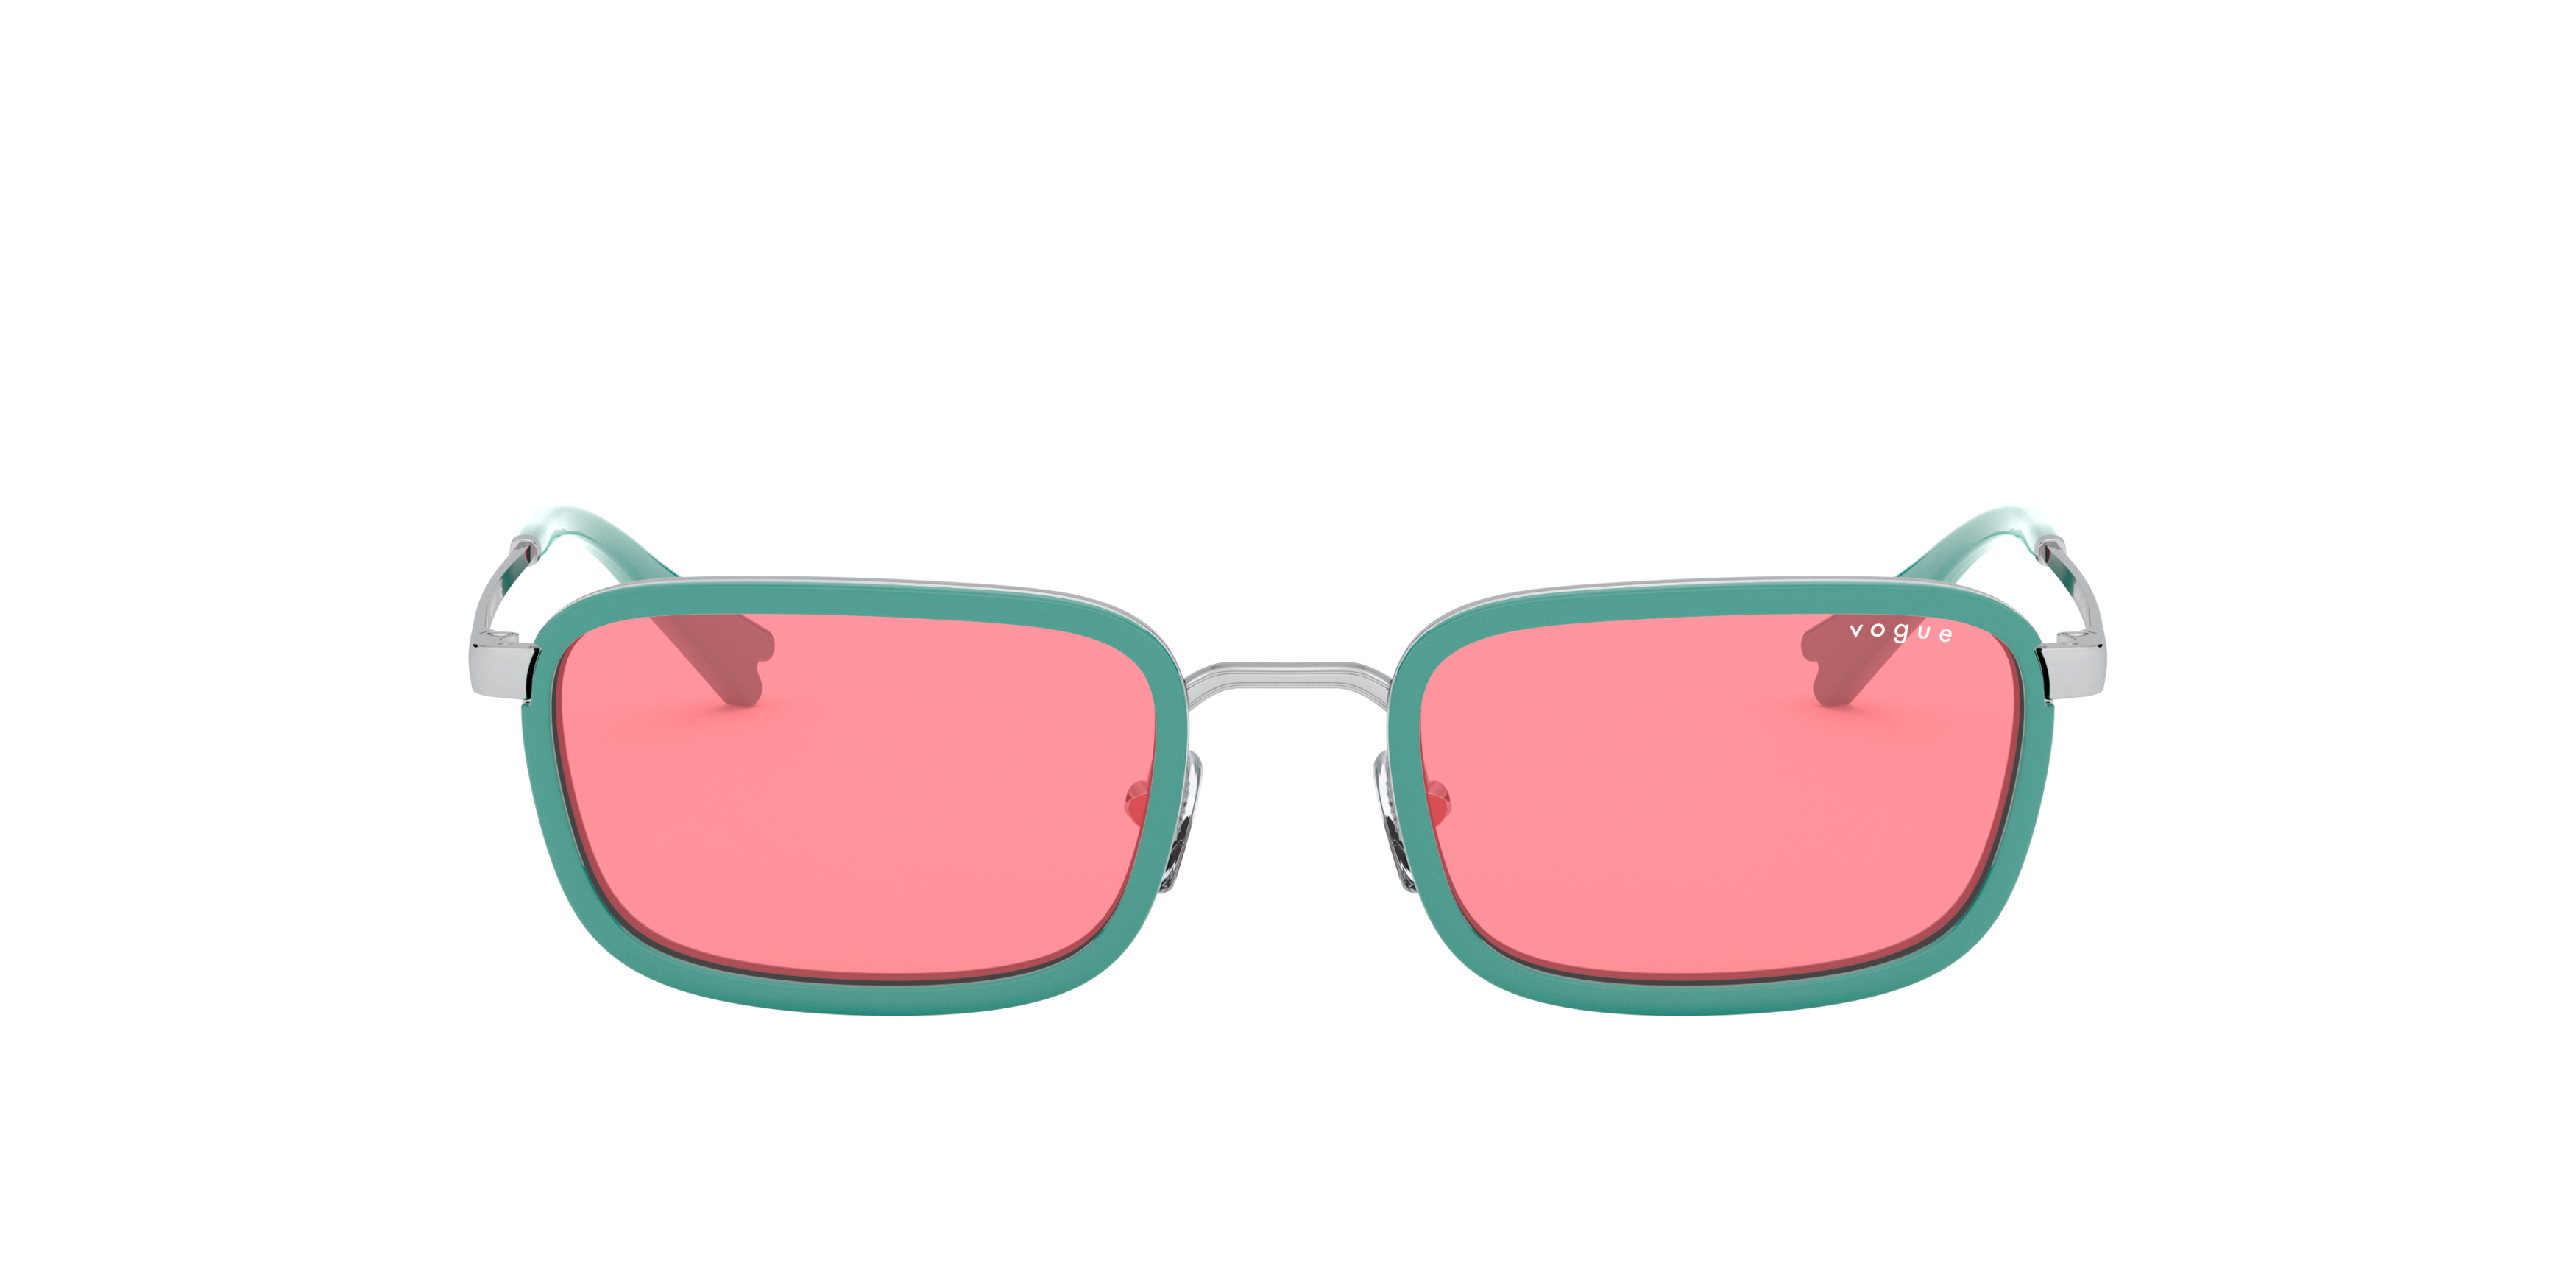 Front Vogue MBB x VO 4166S Sunglasses Pink / Grey